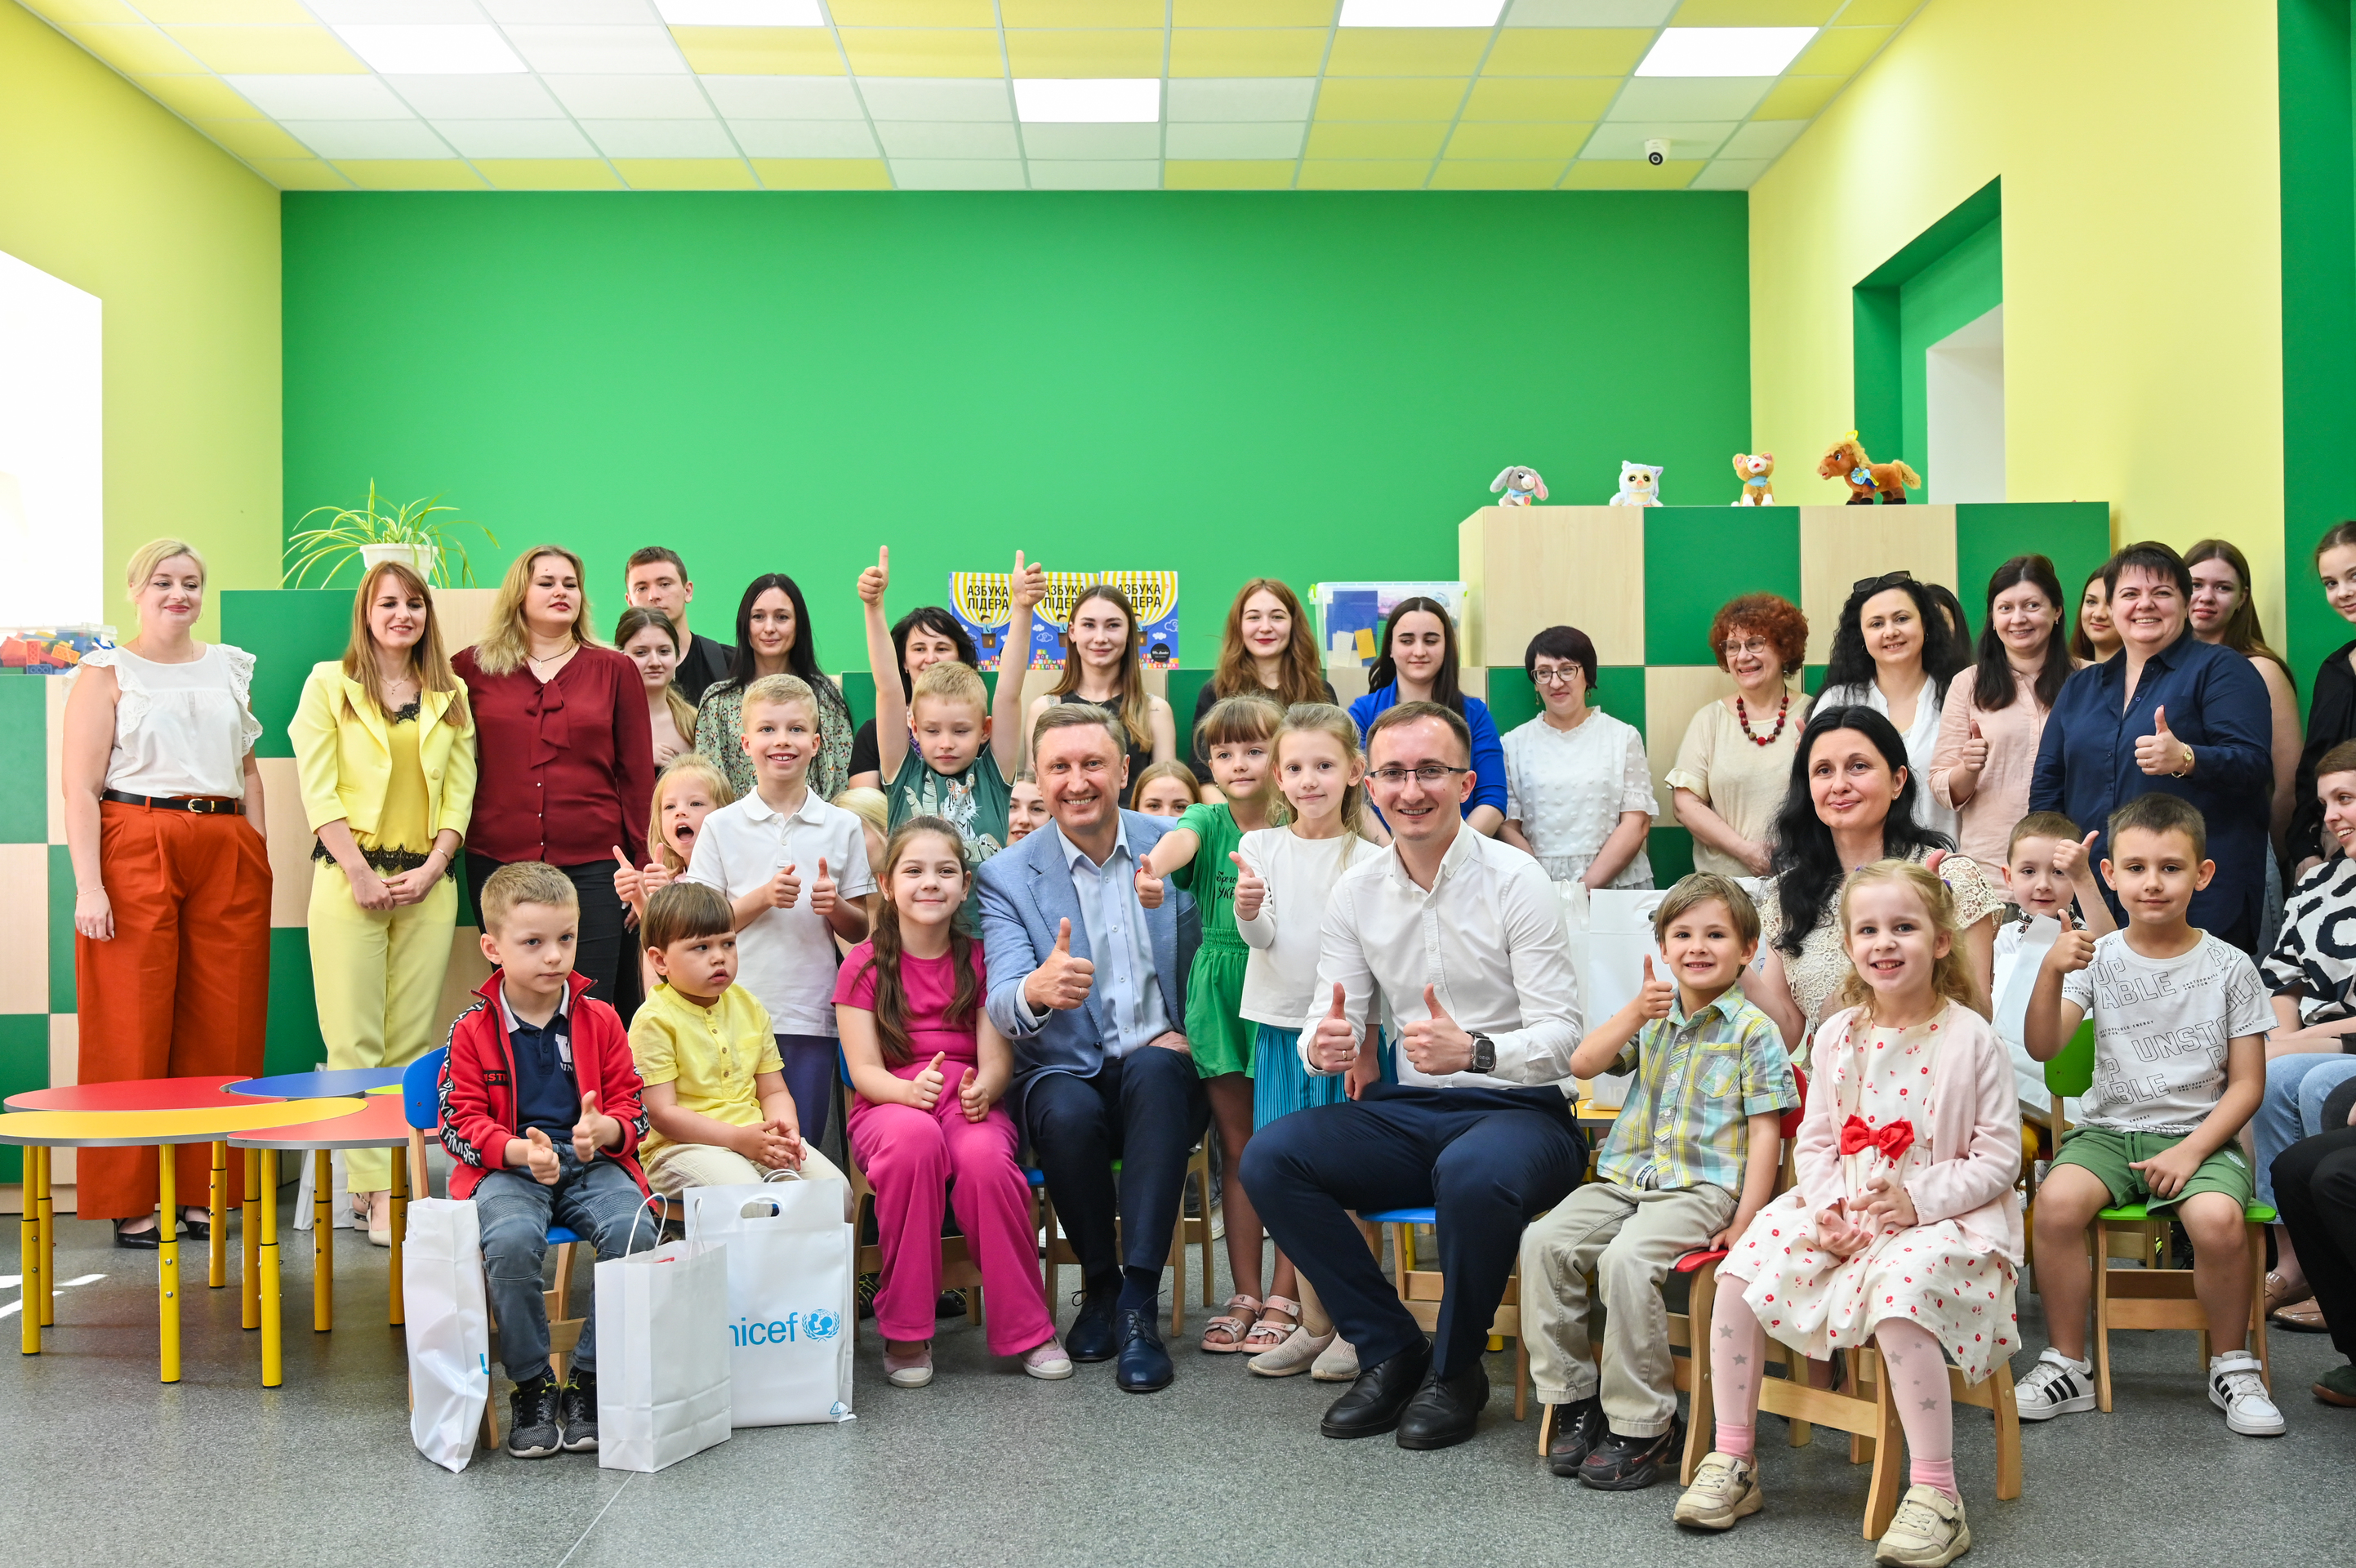 Polytechnic organises a holiday for preschoolers on Children’s Day